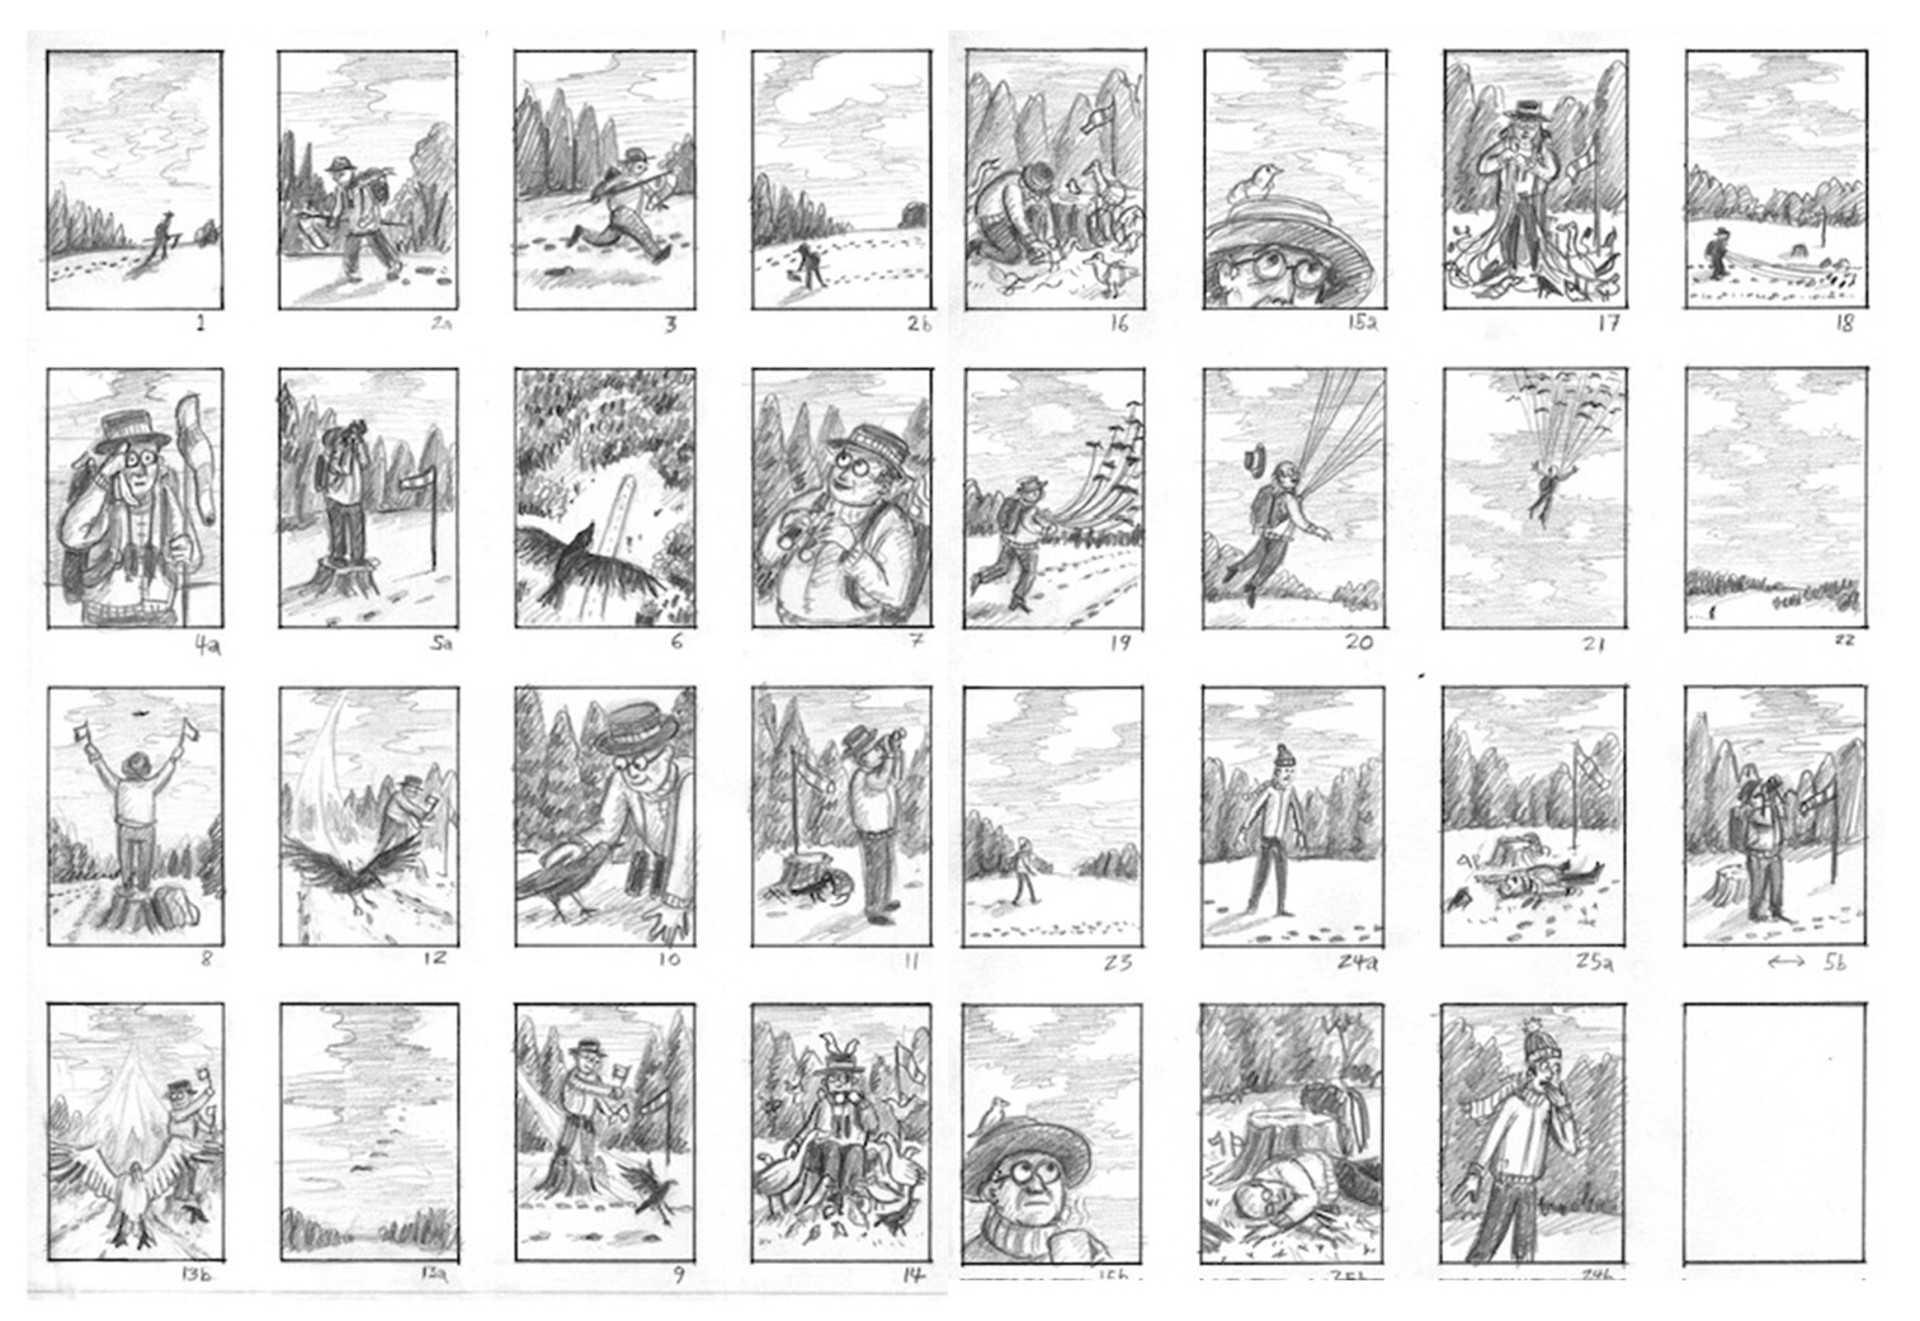 Going South, Story Board by Landis Blair